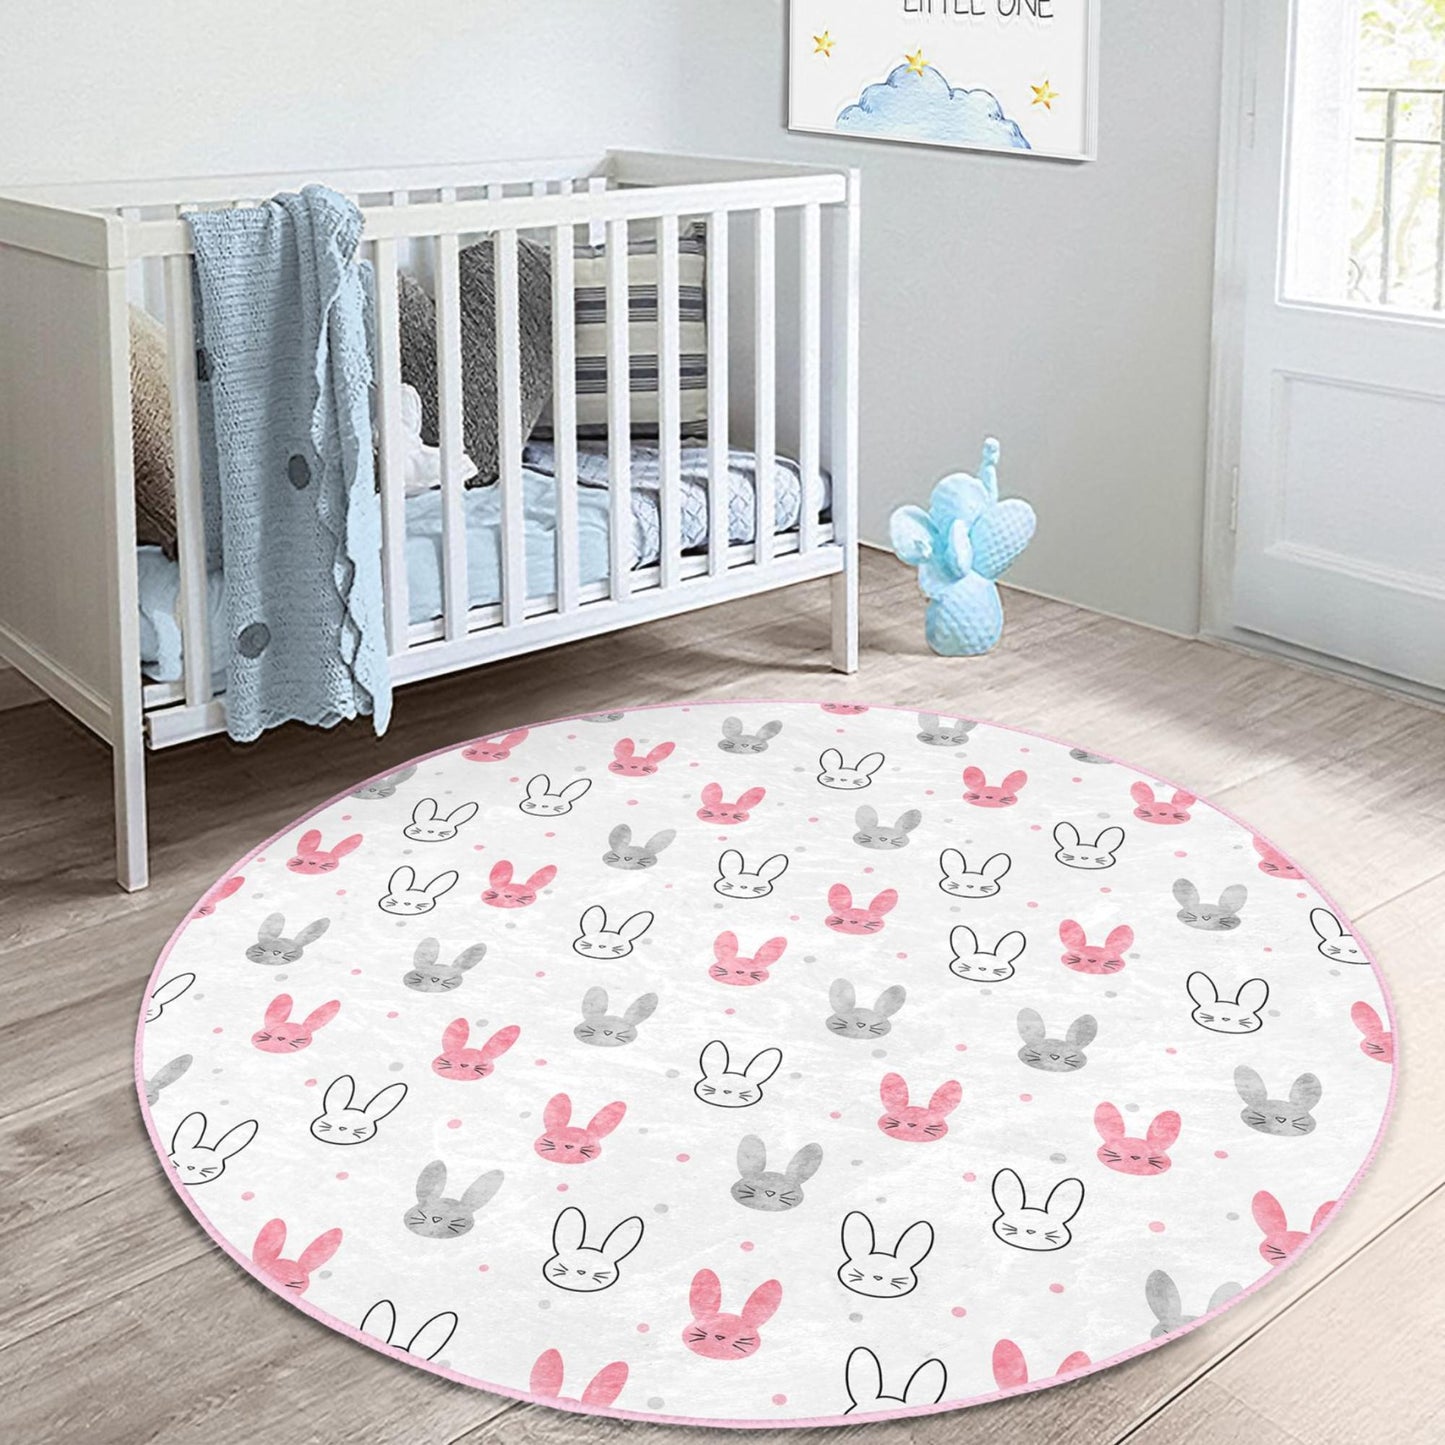 Fun-filled rug featuring lovable rabbit designs for children's room ambiance.